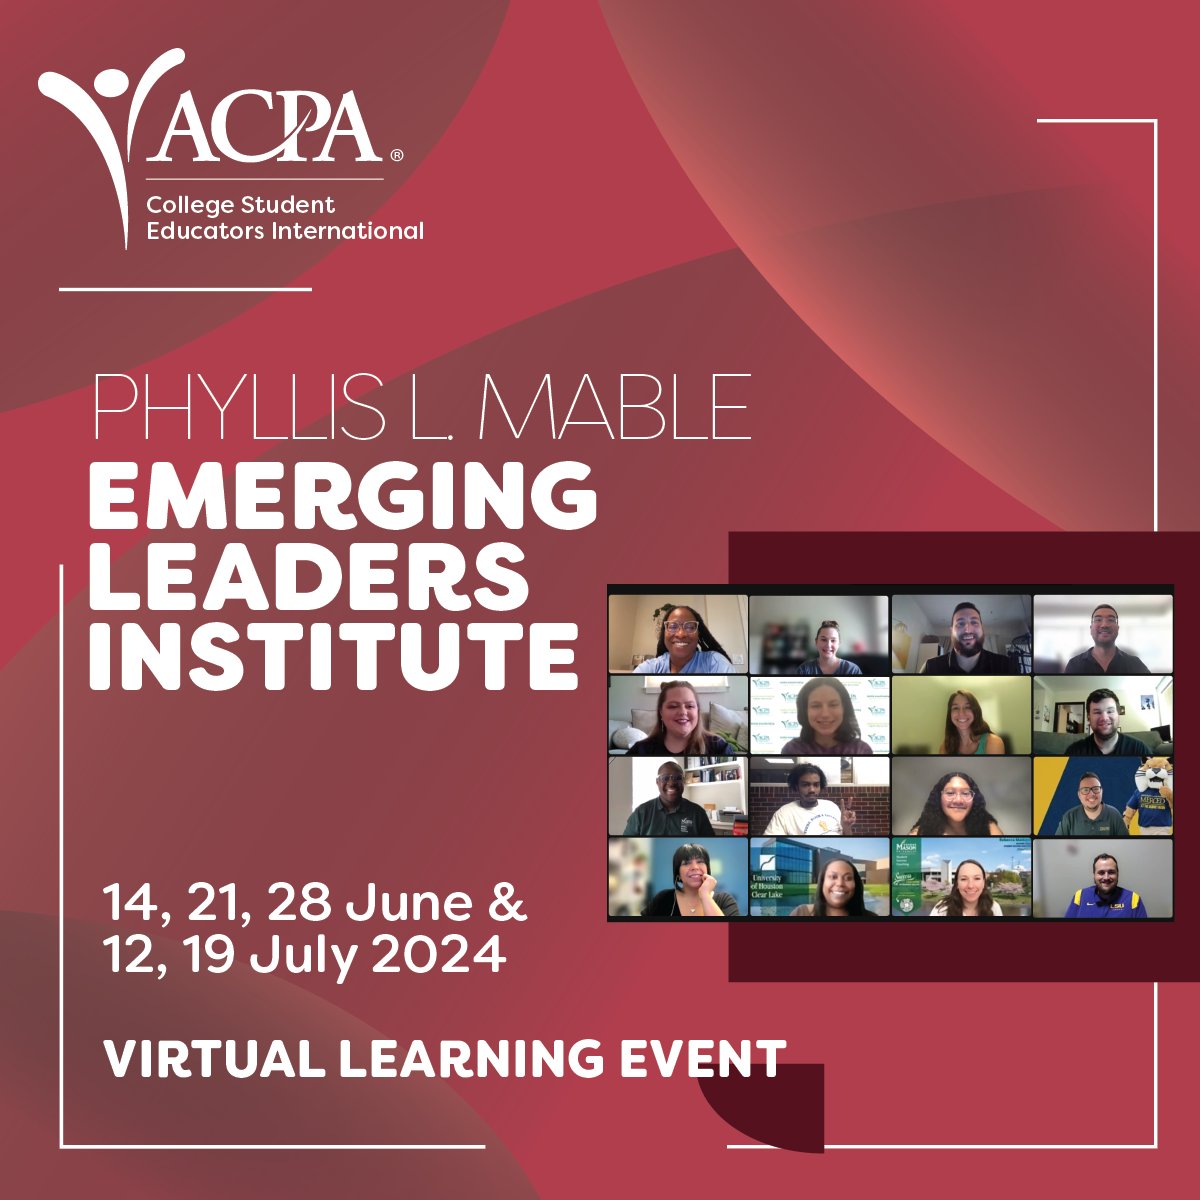 Registration is now open for @ACPA's 2024 Phyllis L. Mable Emerging Leaders Institute!

Ideal for new professionals in #StudentAffairs, the sessions will take place virtually on Fridays in June and July. 

More info and registration: myacpa.org/event/eli-2024/

#ELI2024